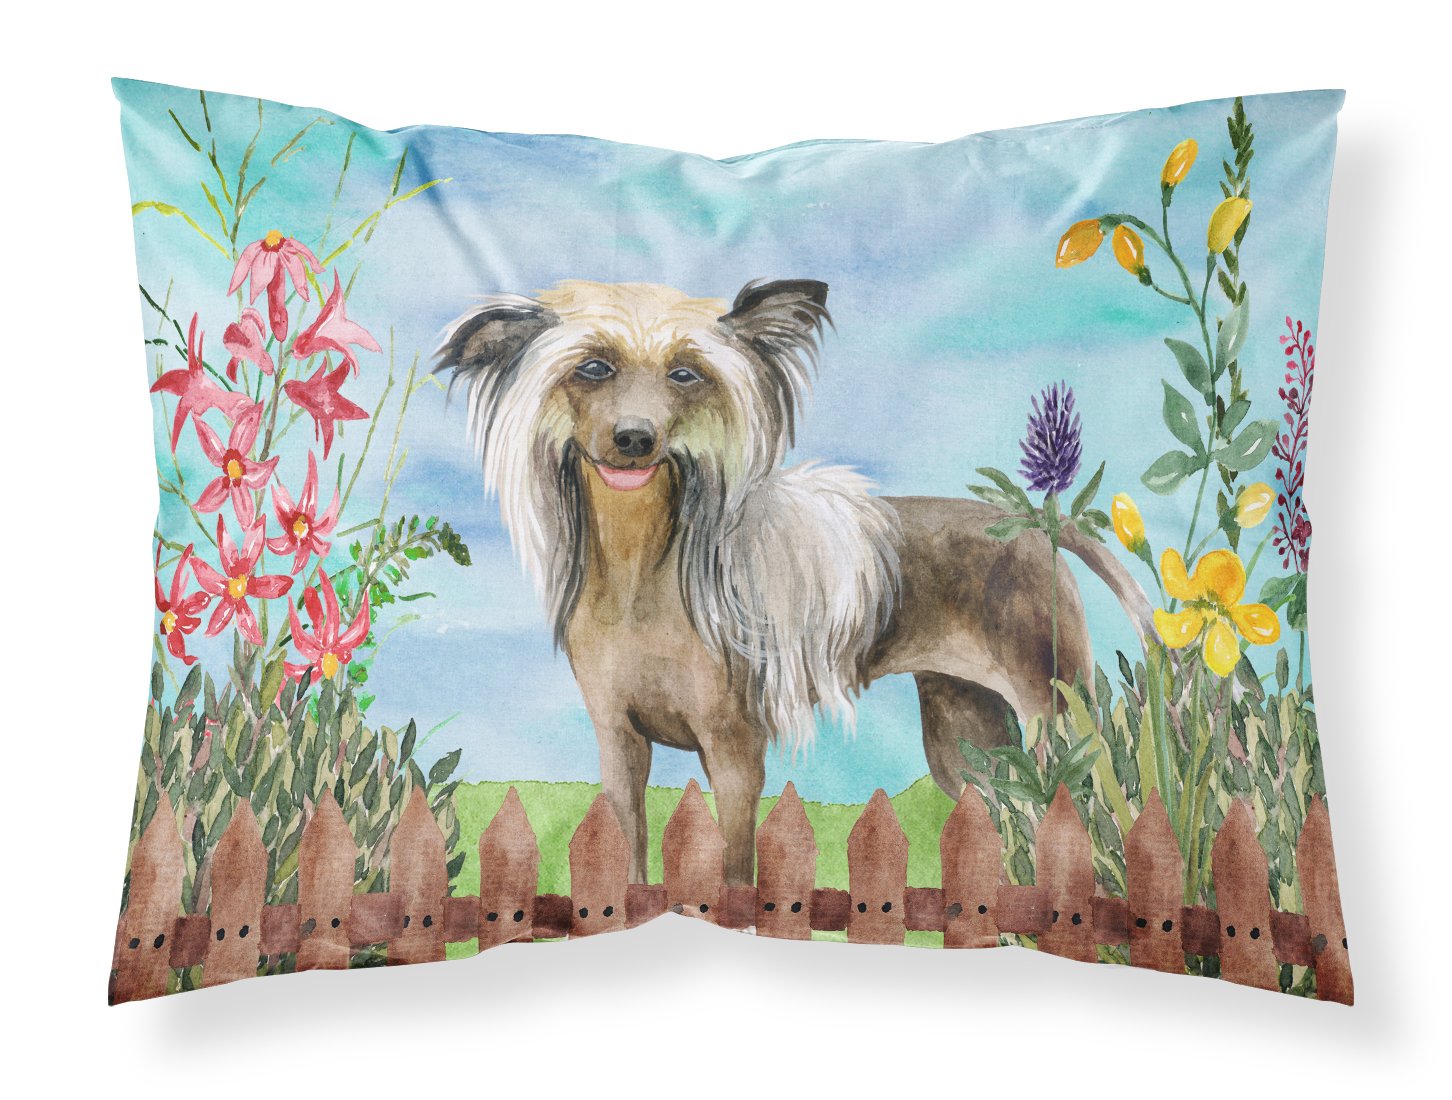 Chinese Crested Spring Fabric Standard Pillowcase CK1221PILLOWCASE by Caroline's Treasures